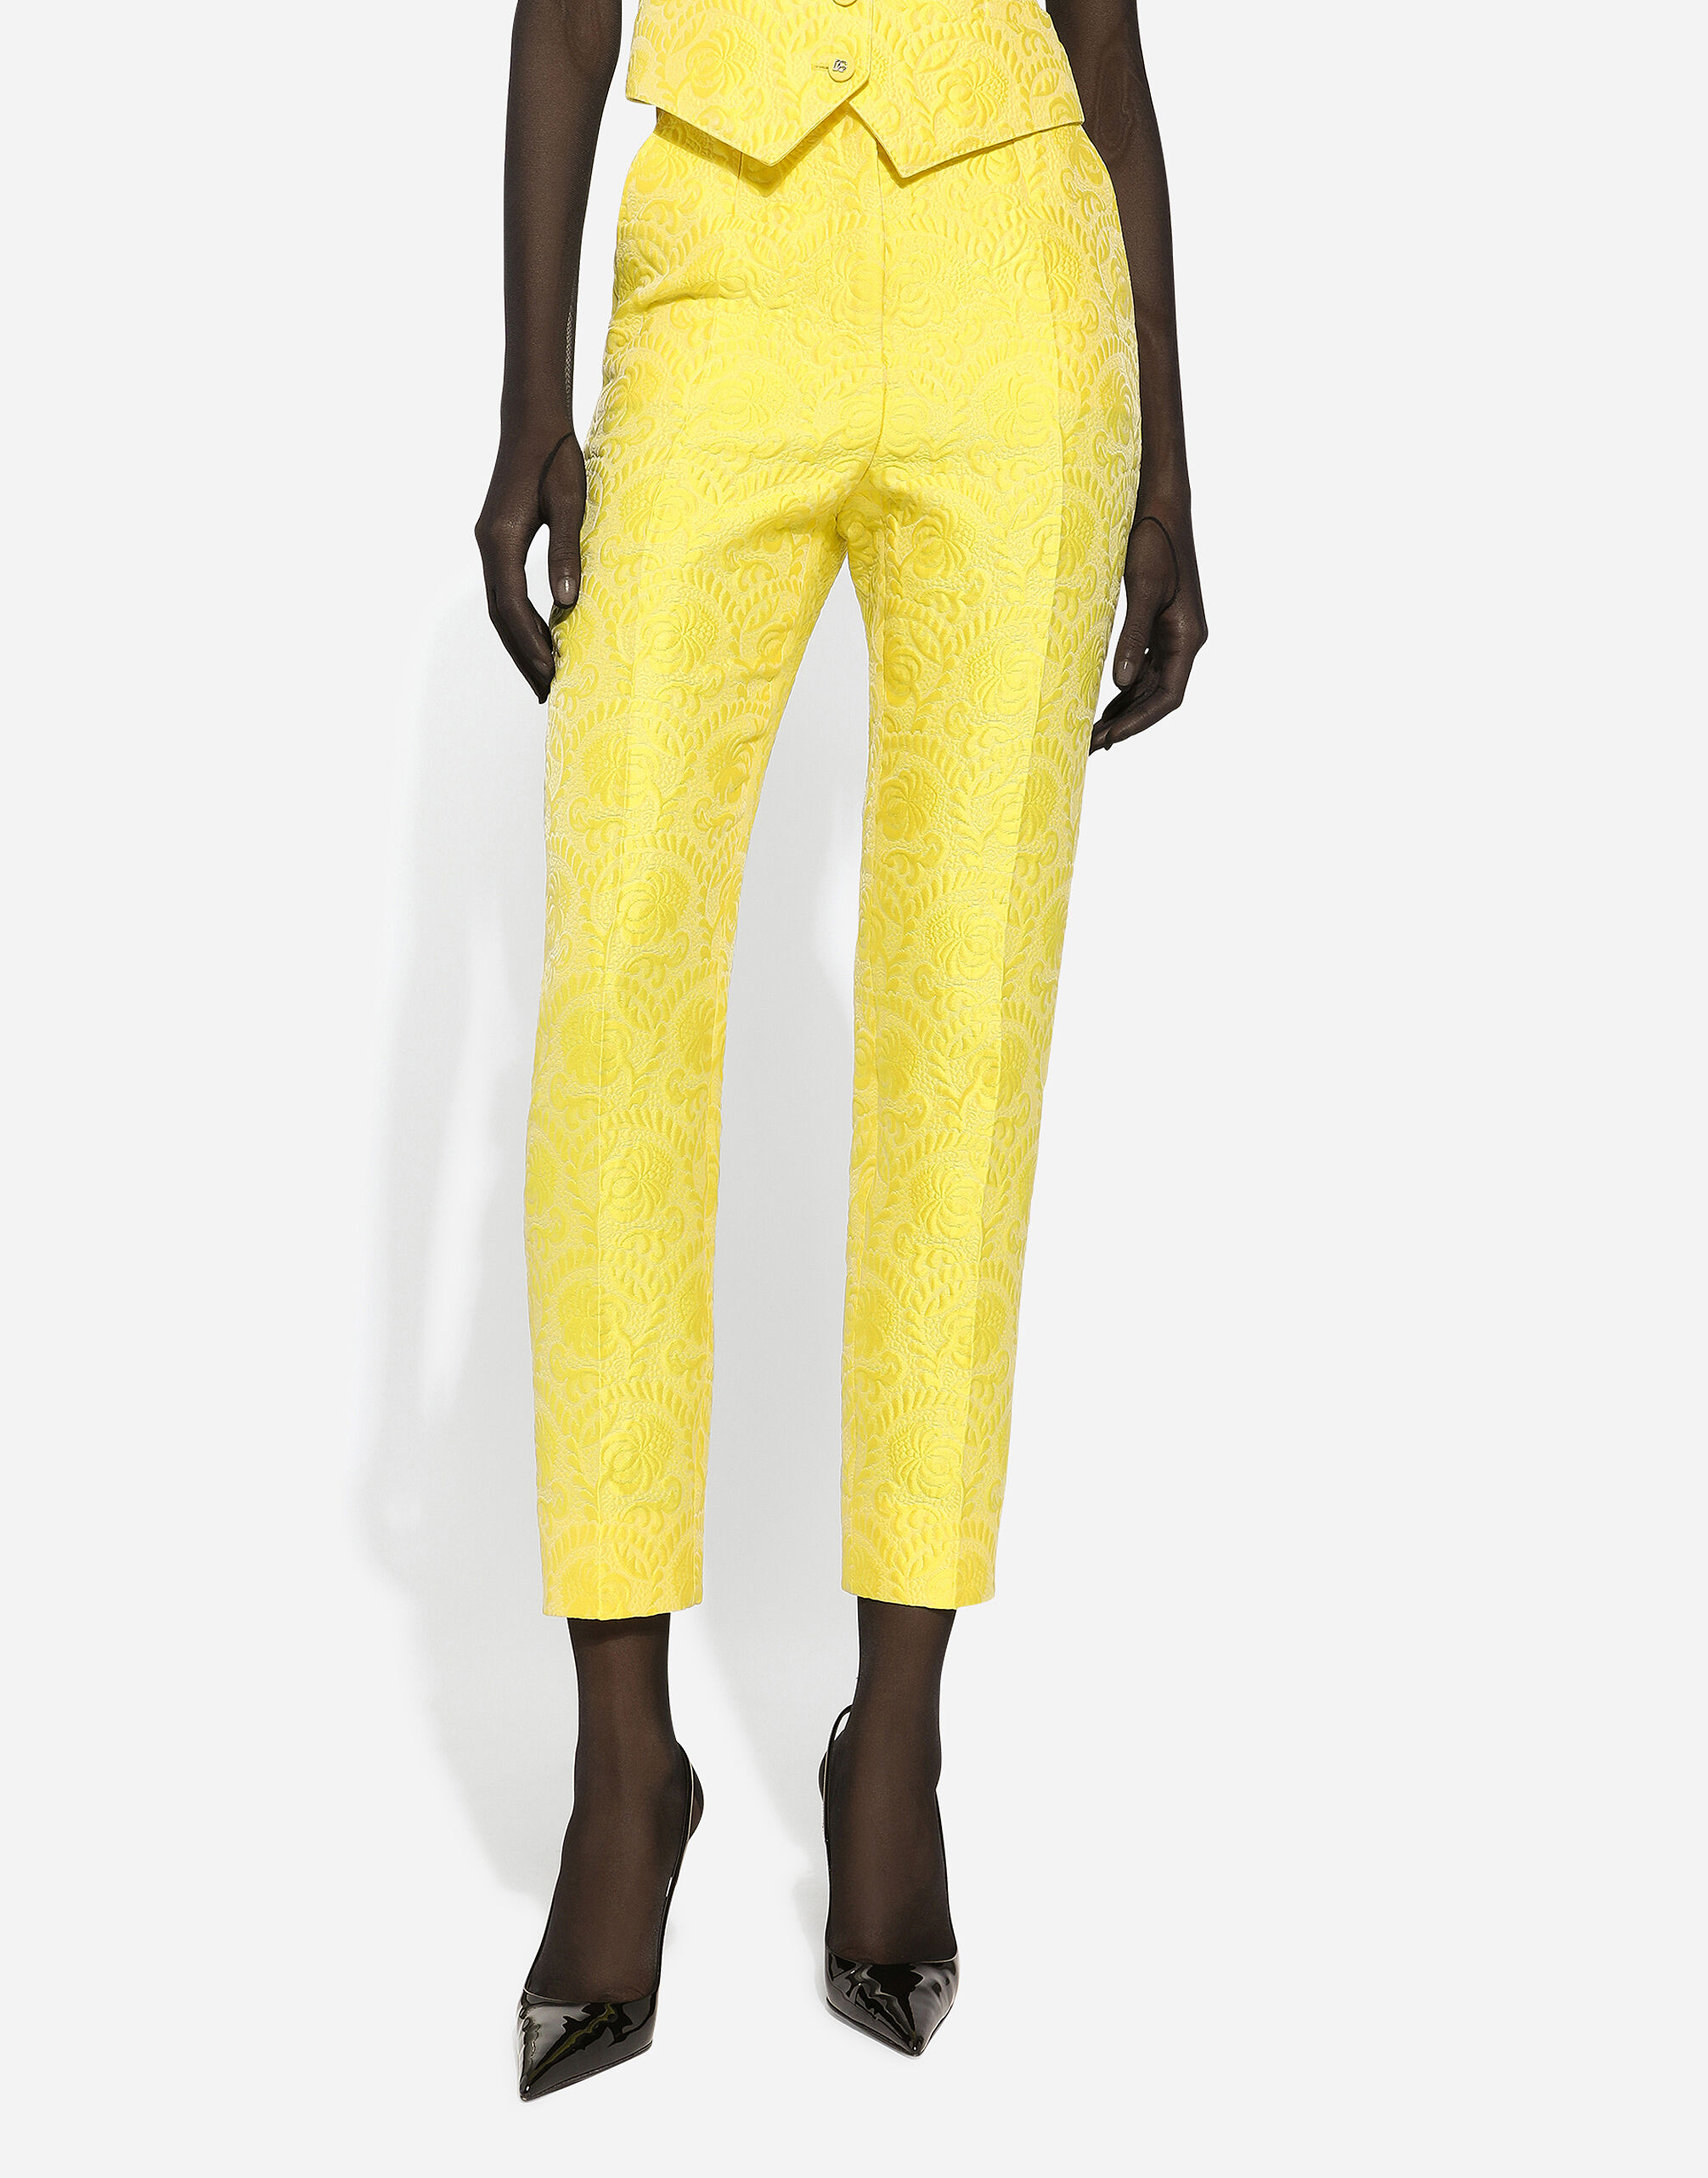 Dolce & Gabbana Tailored floral jacquard pants female Yellow